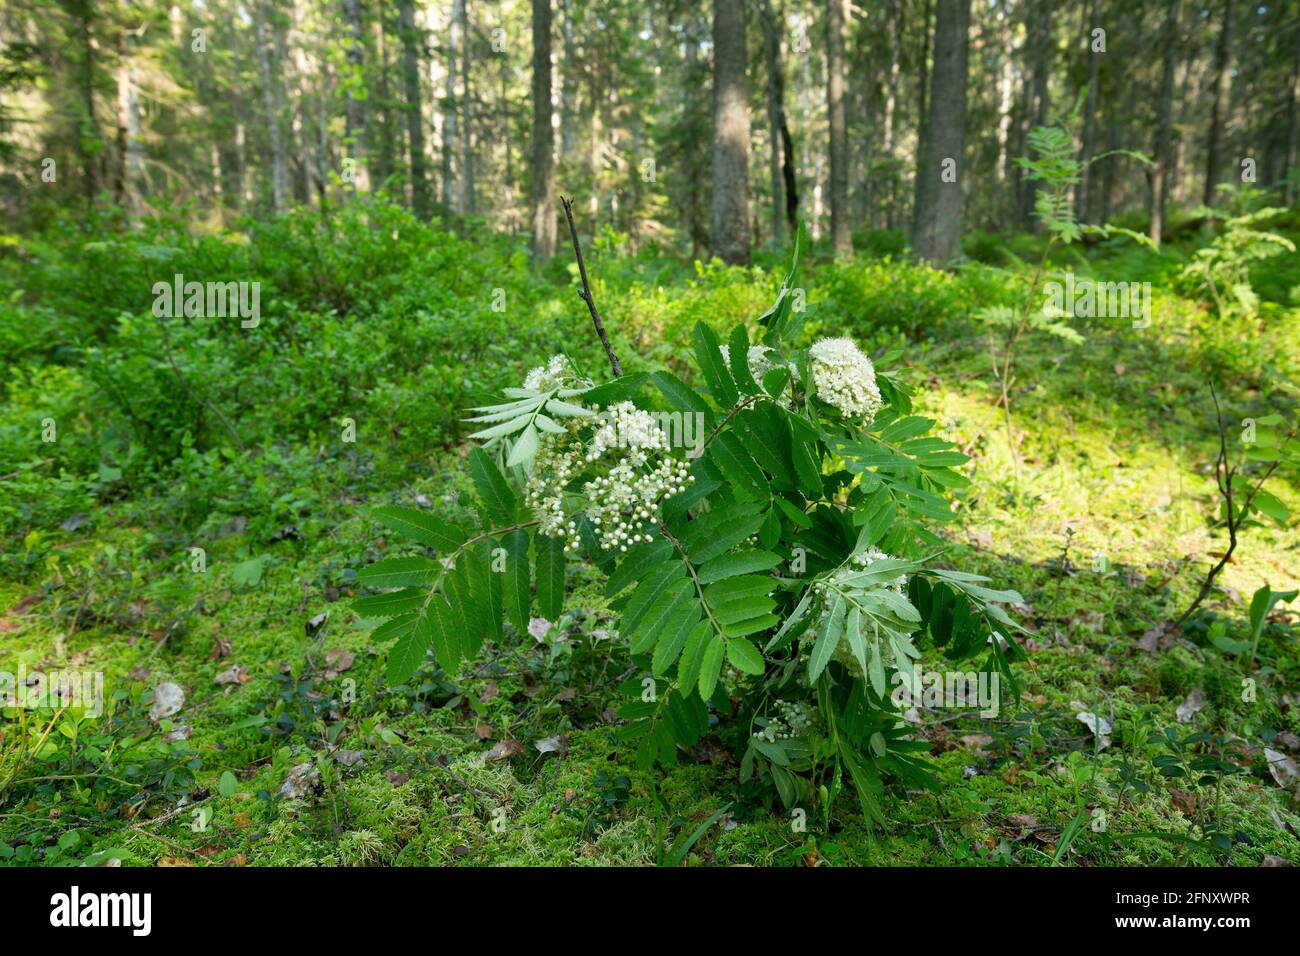 Blooming rowan, Sorbus aucuparia twigs used for attracting insects in entomological research in sunlit coniferous forest Stock Photo